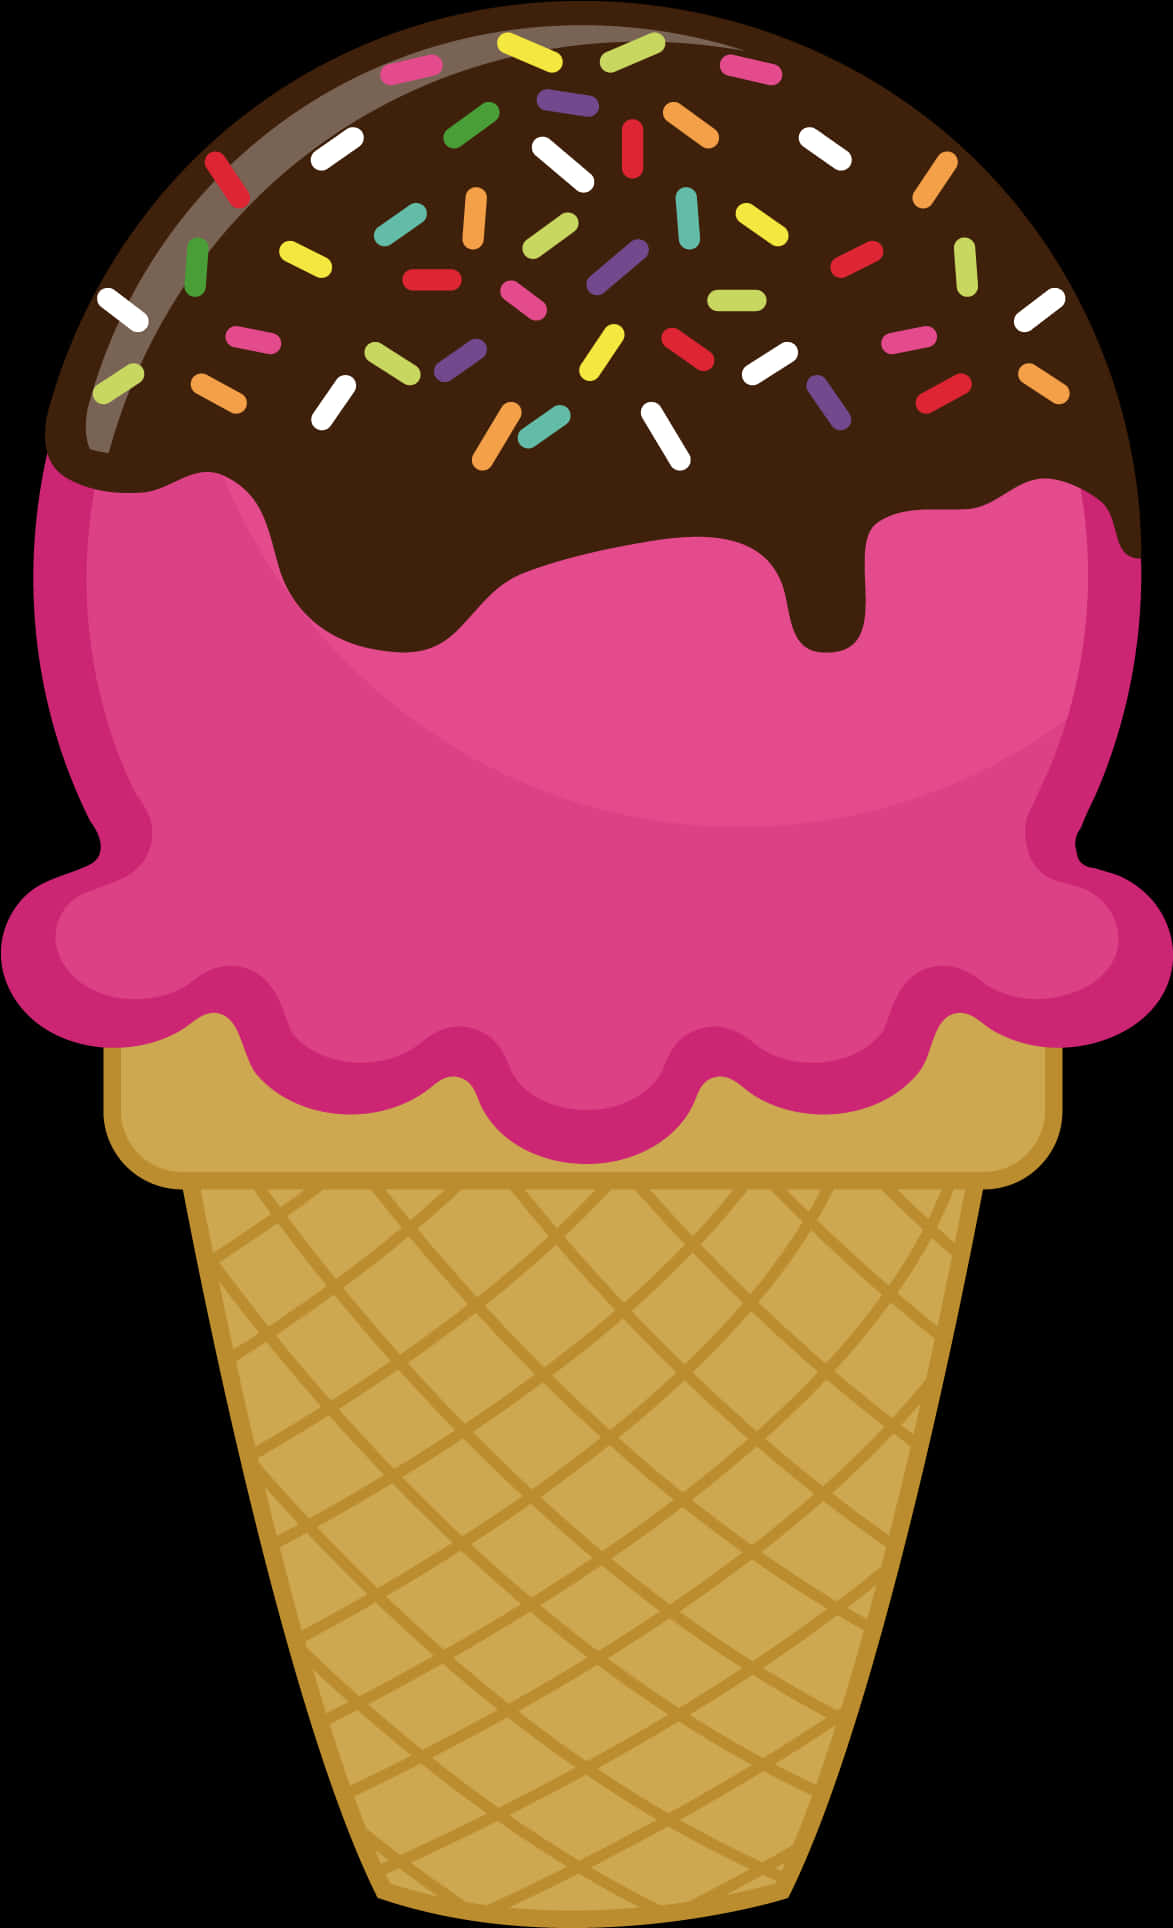 Colorful Ice Cream Cone Clipart PNG